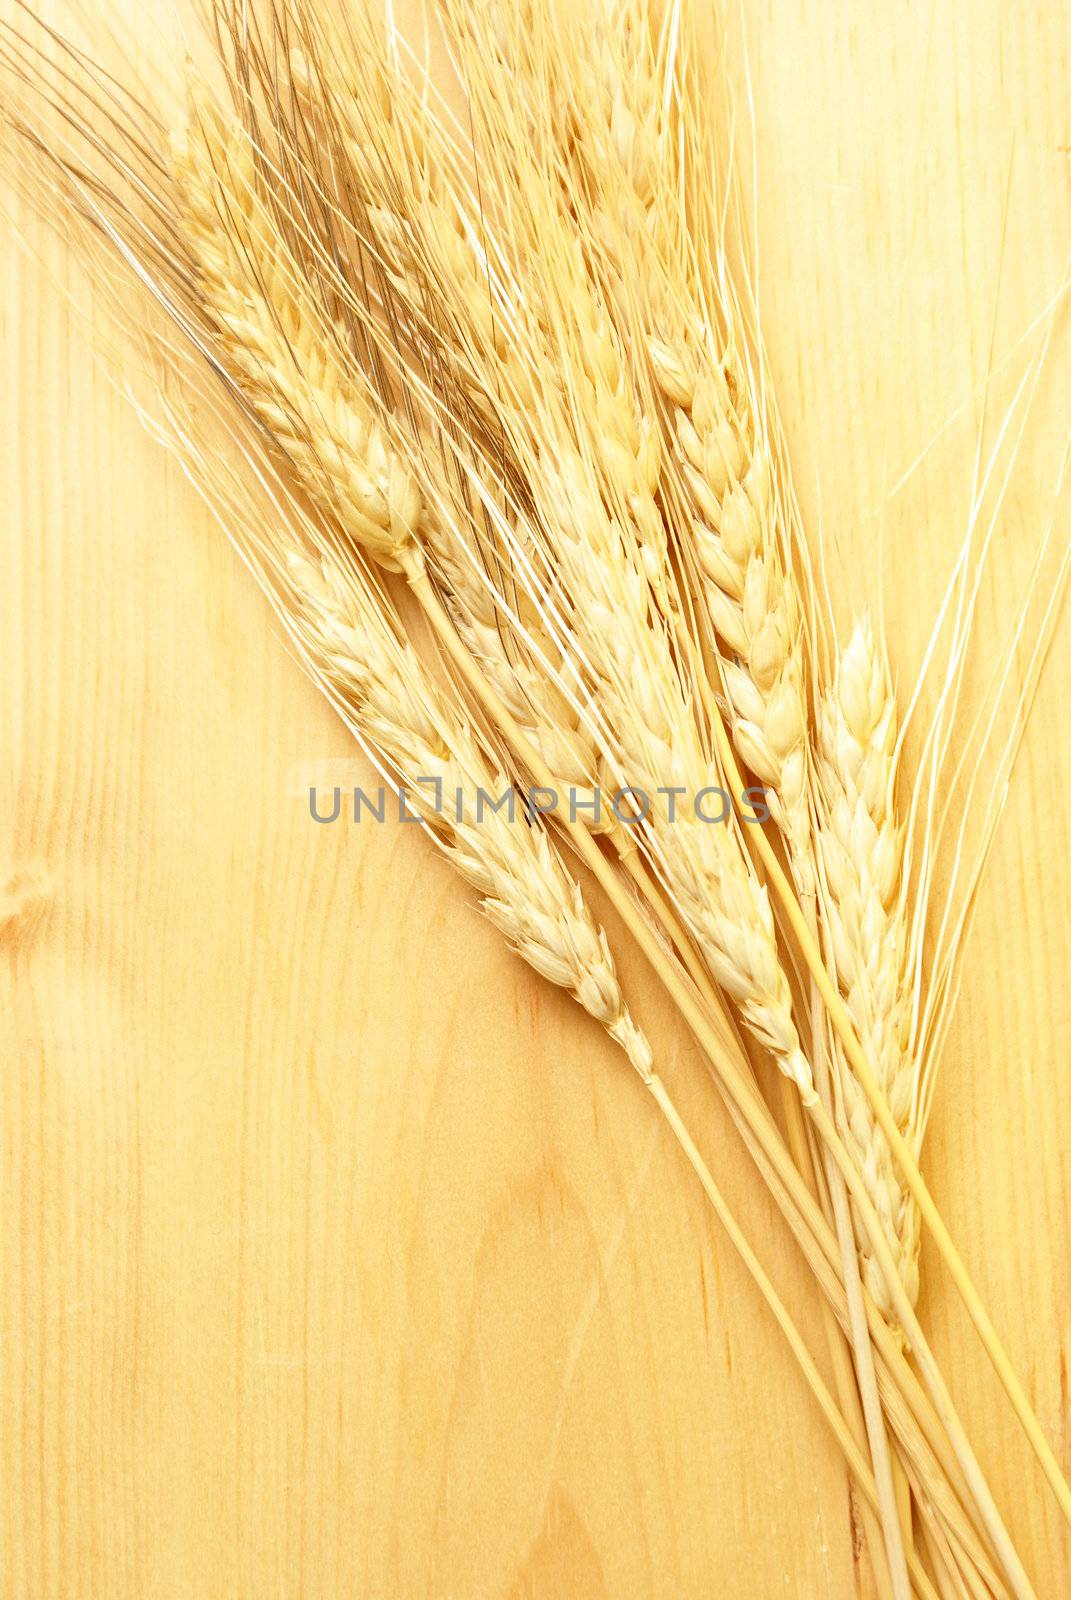 A closeup shot of some bearded wheat on a wooden board.